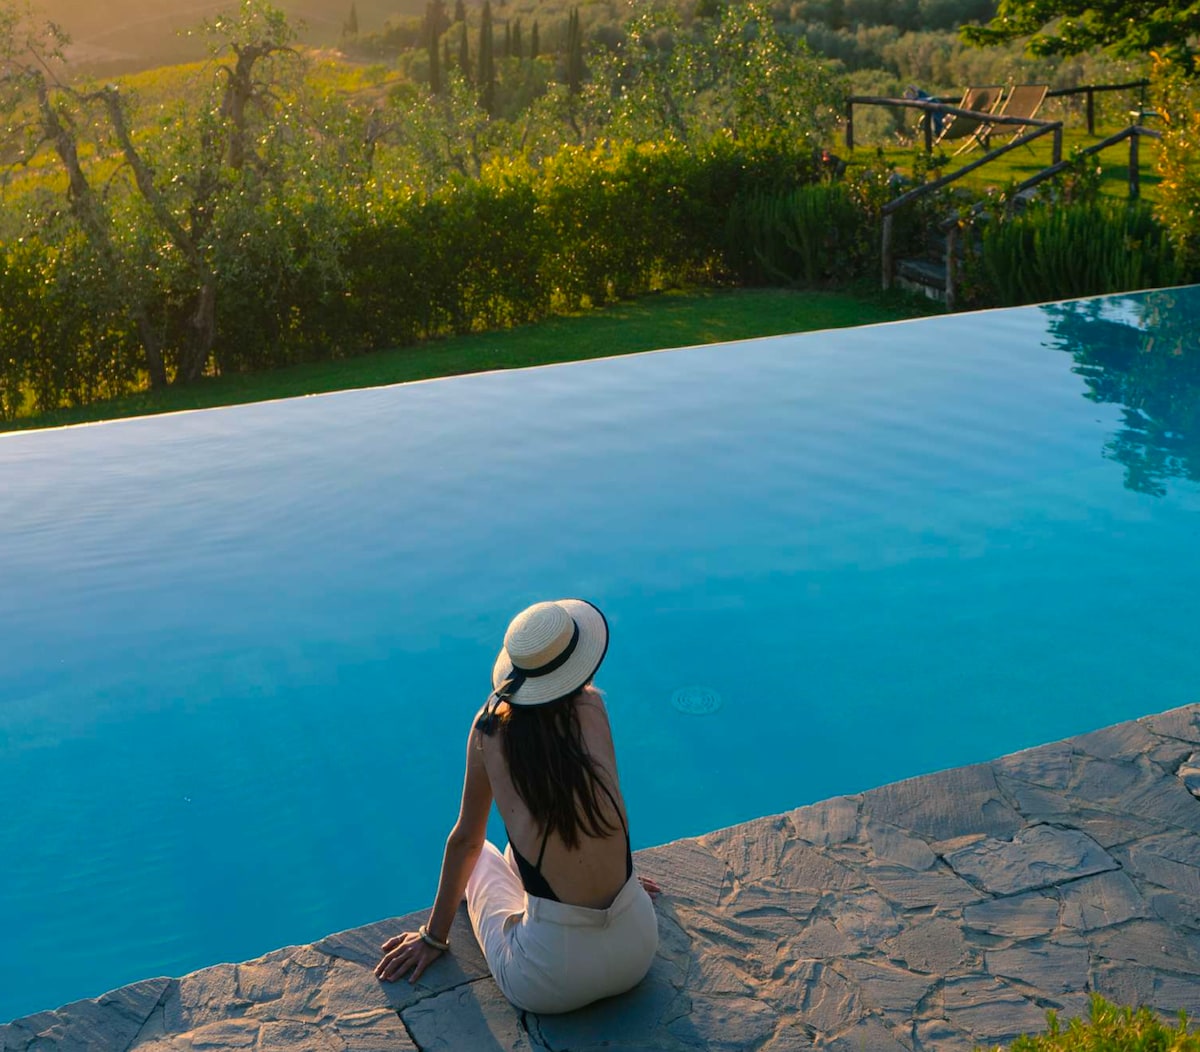 Luxury Villa in lovely tuscan countryside